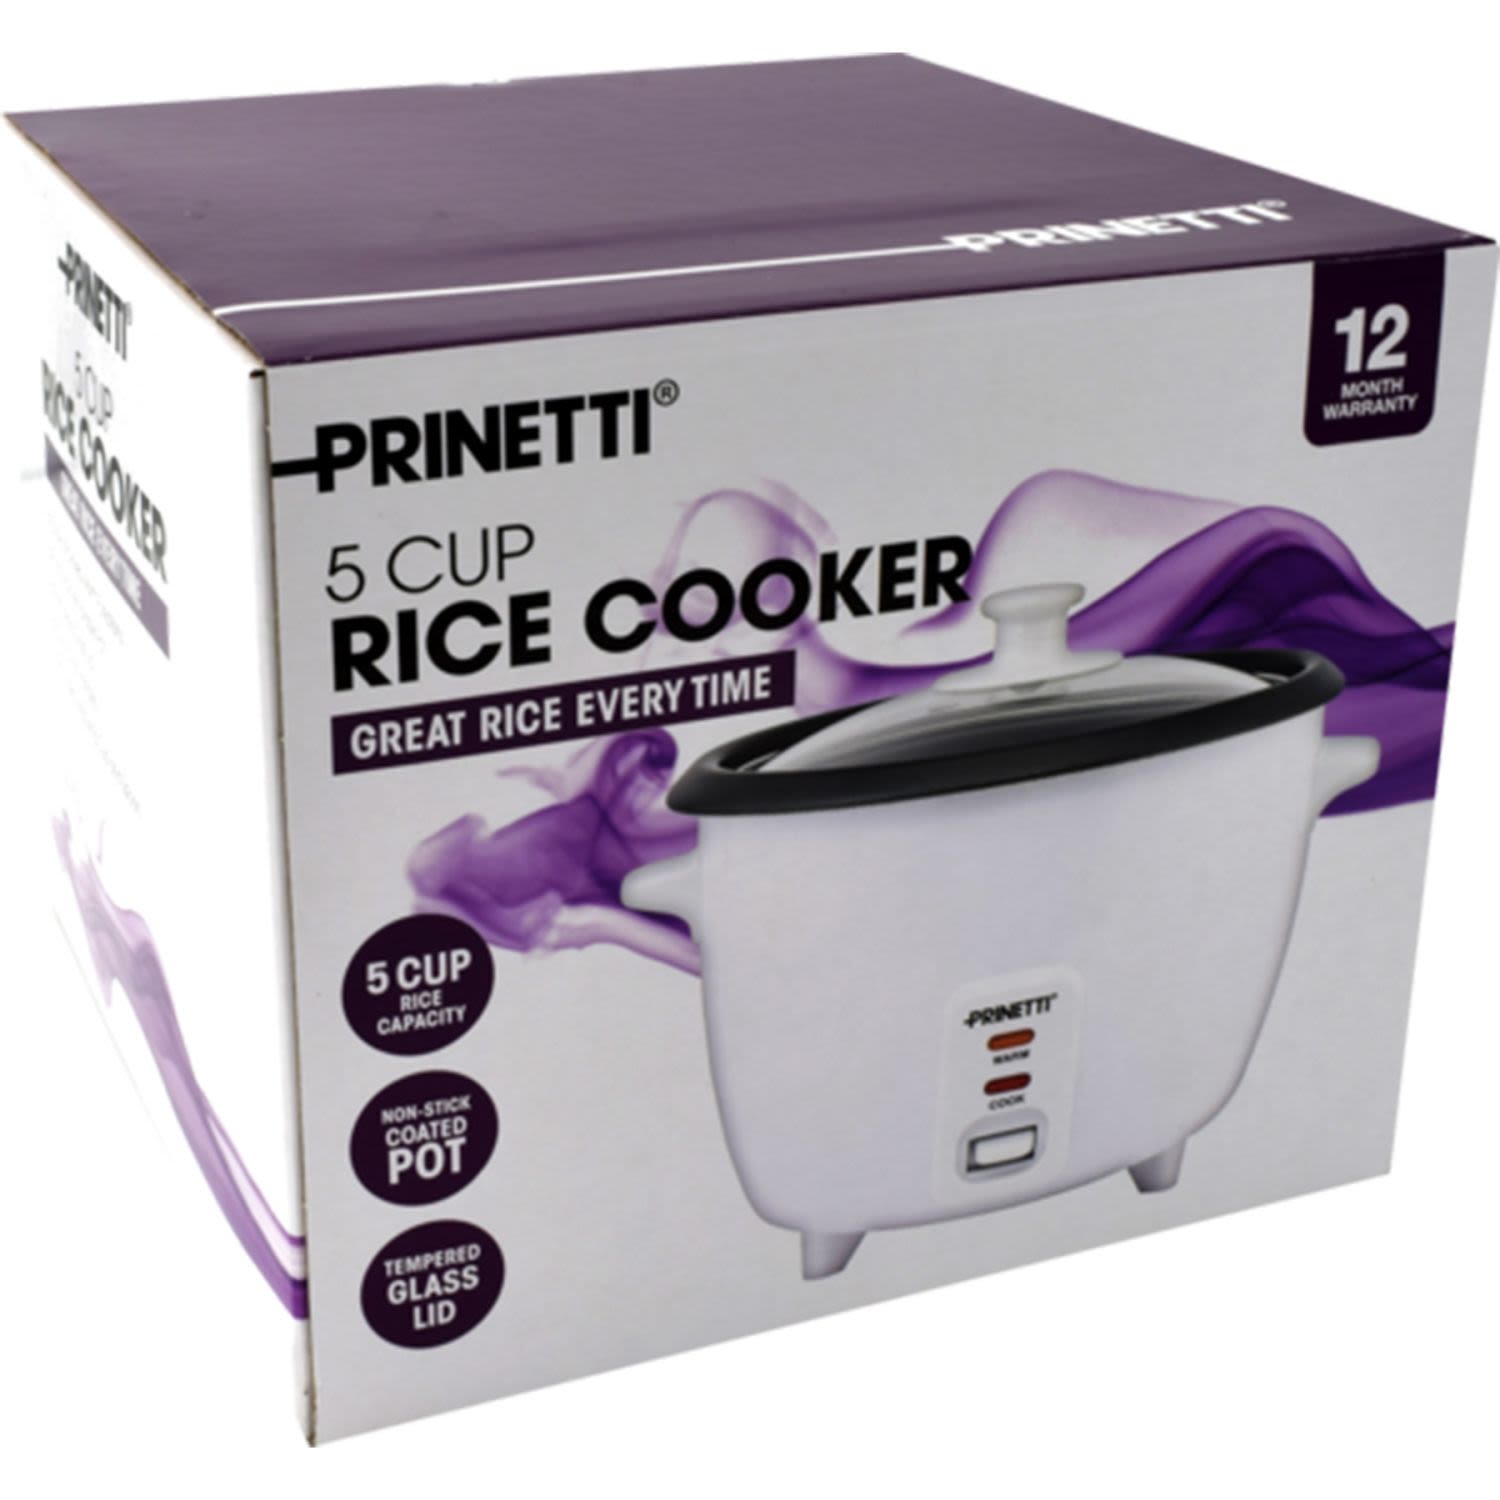 Prinetti Rice Cooker 5 Cup, 1 Each